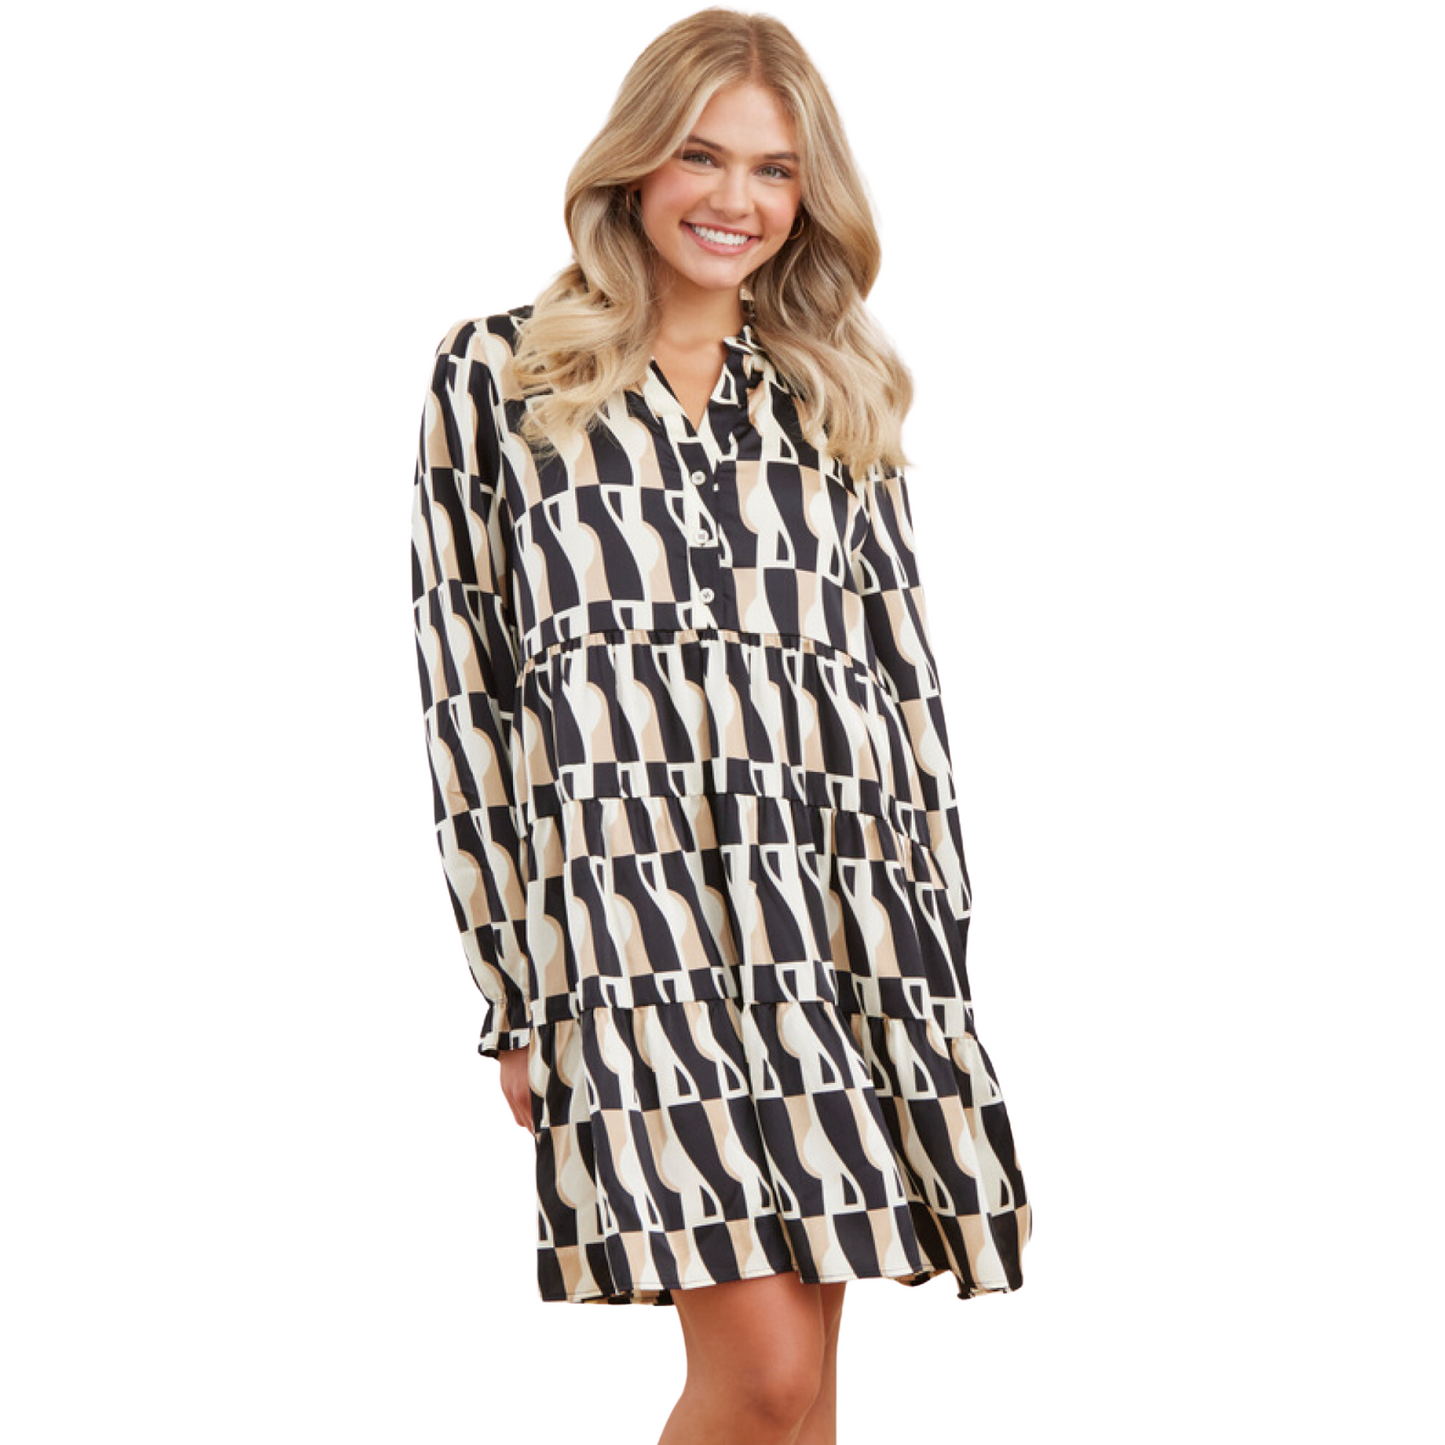 This contemporary mini dress is the perfect addition to your wardrobe. It features a geometric print, button-up collar neck, back wrinkle detail, and long poet sleeves. The fabric is unlined, non-sheer, and lightweight - perfect for those in-between seasons. Choose from a black and taupe mix for a unique look.